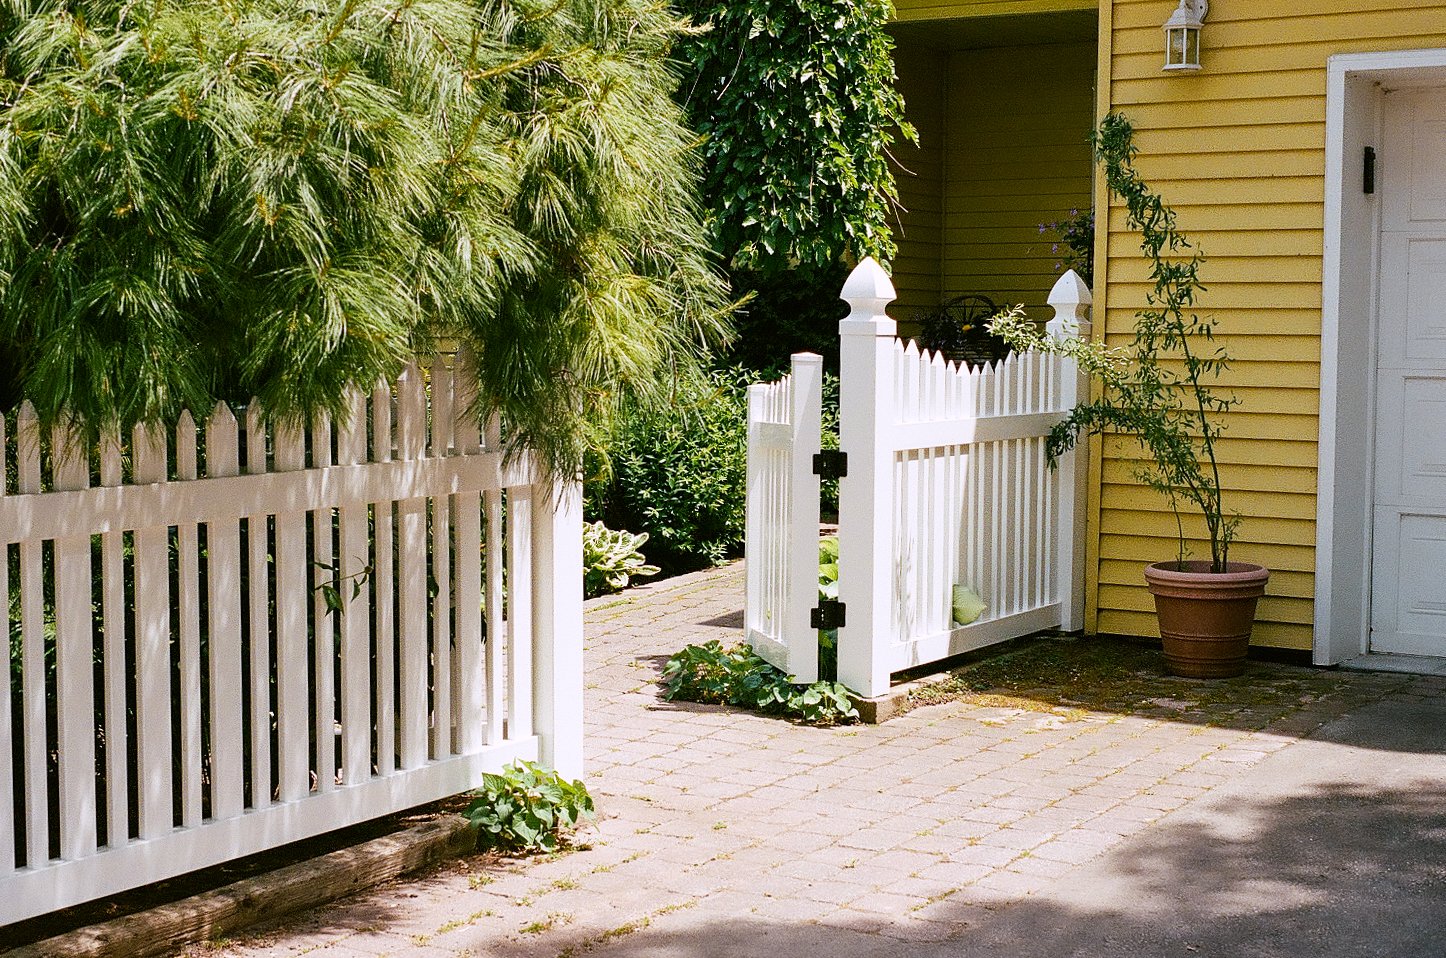  White picket fence in Ontario, Canada 